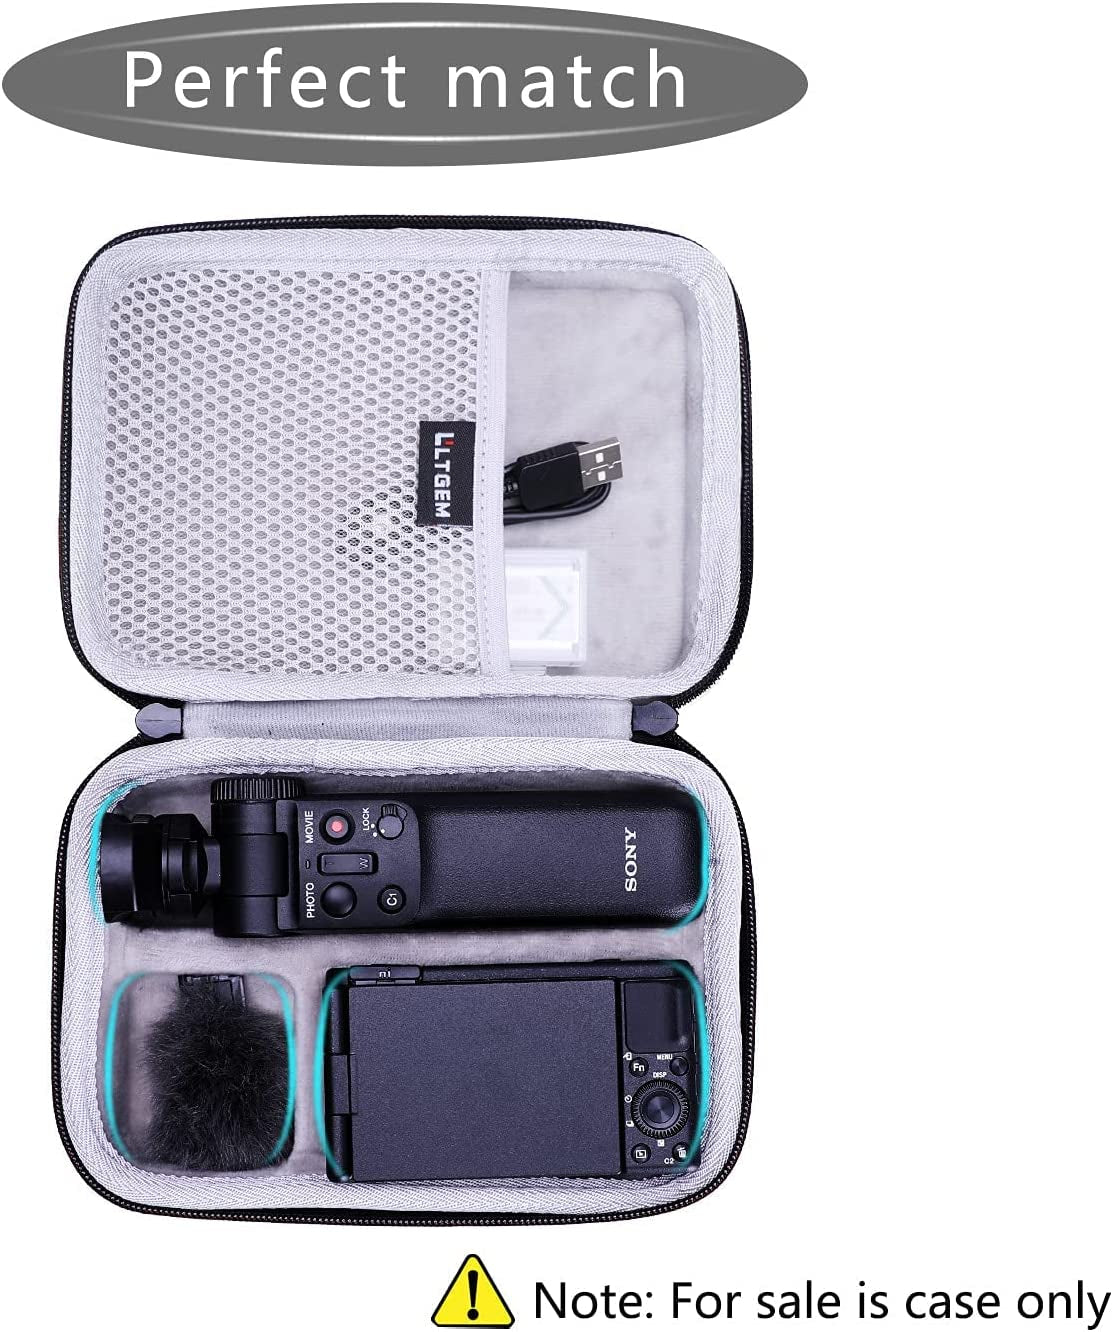 Hard Case for Sony ZV-1 / ZV-1F Vlog Camera by LTGEM. Fits Vlogger Accessory Kit Tripod and Microphone - Travel Protective Carrying Storage Bag